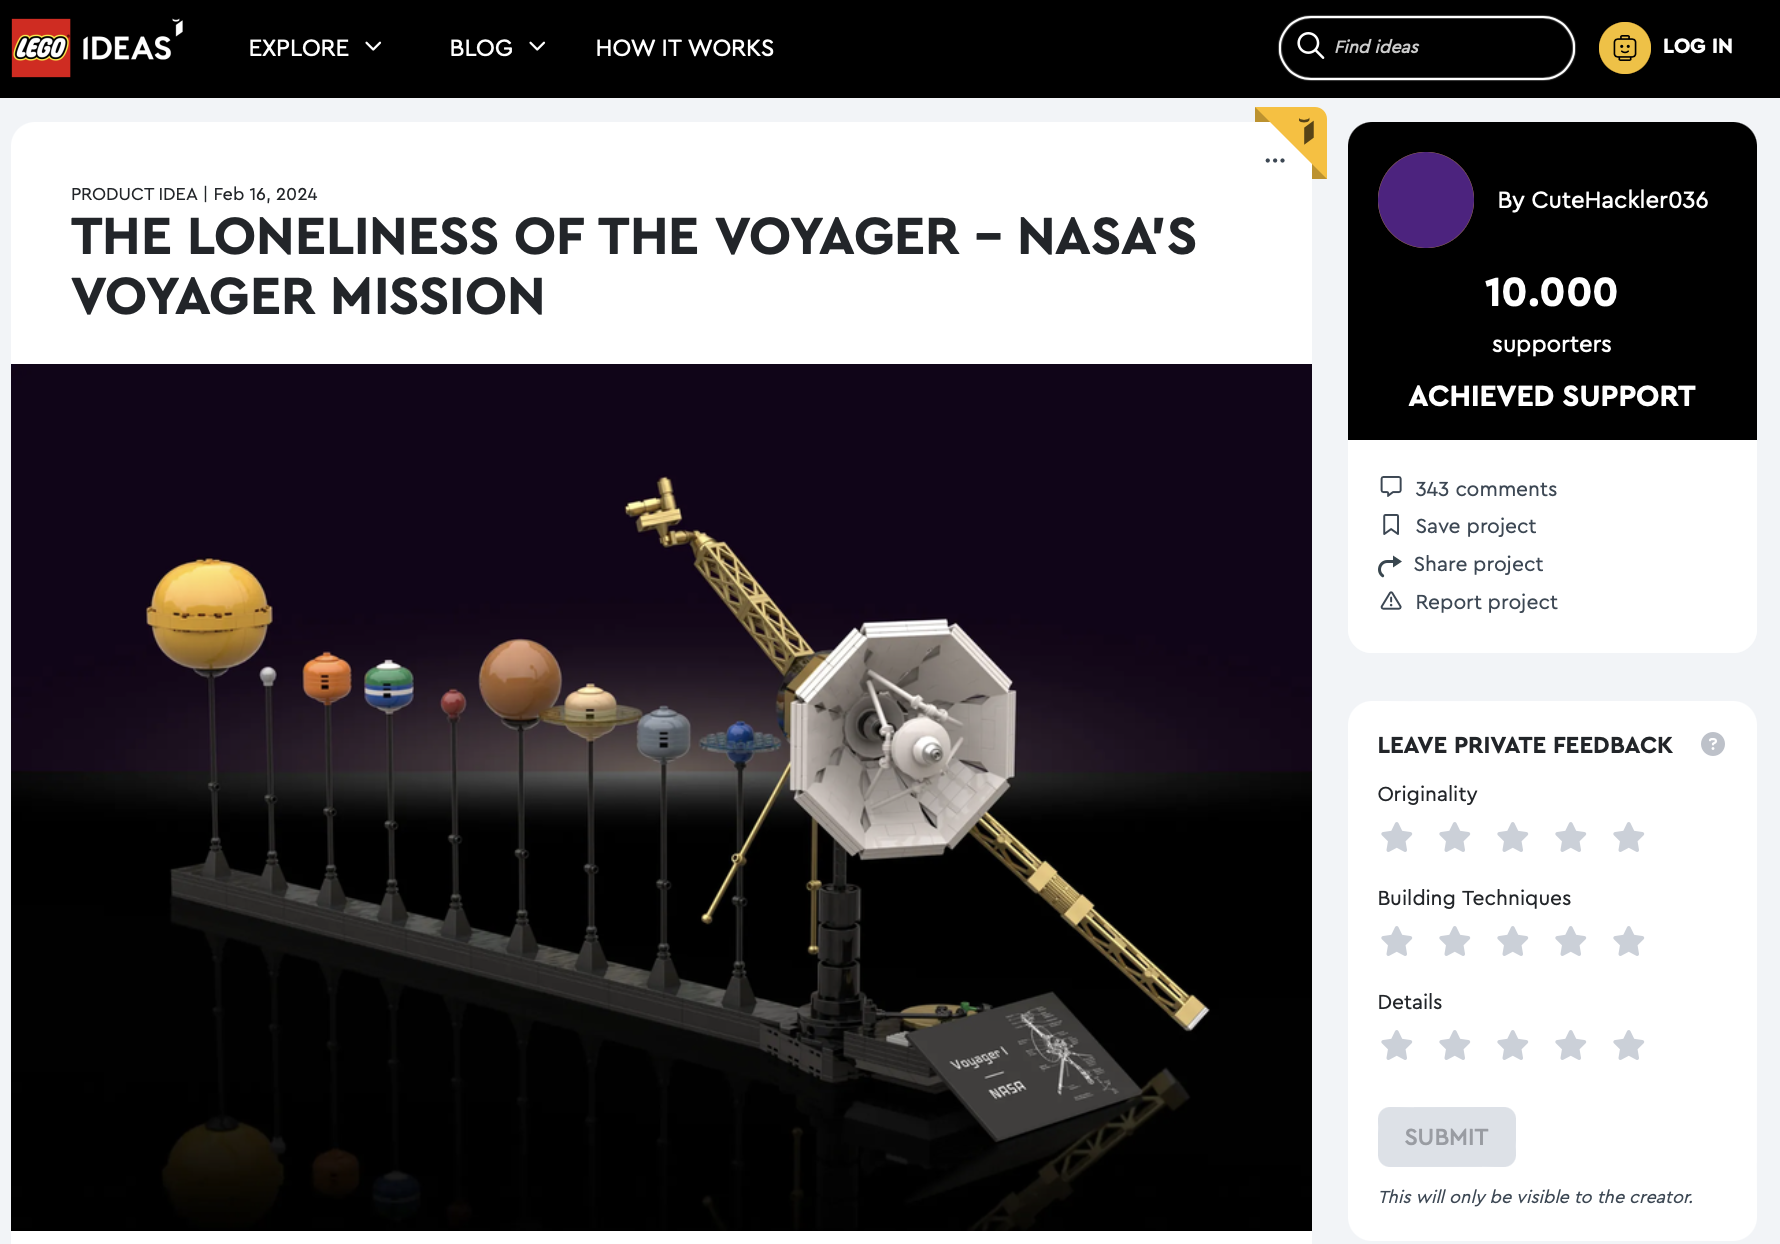 The Loneliness of the Voyager – NASA’s Voyager Mission raggiunge i 10k su LEGO Ideas